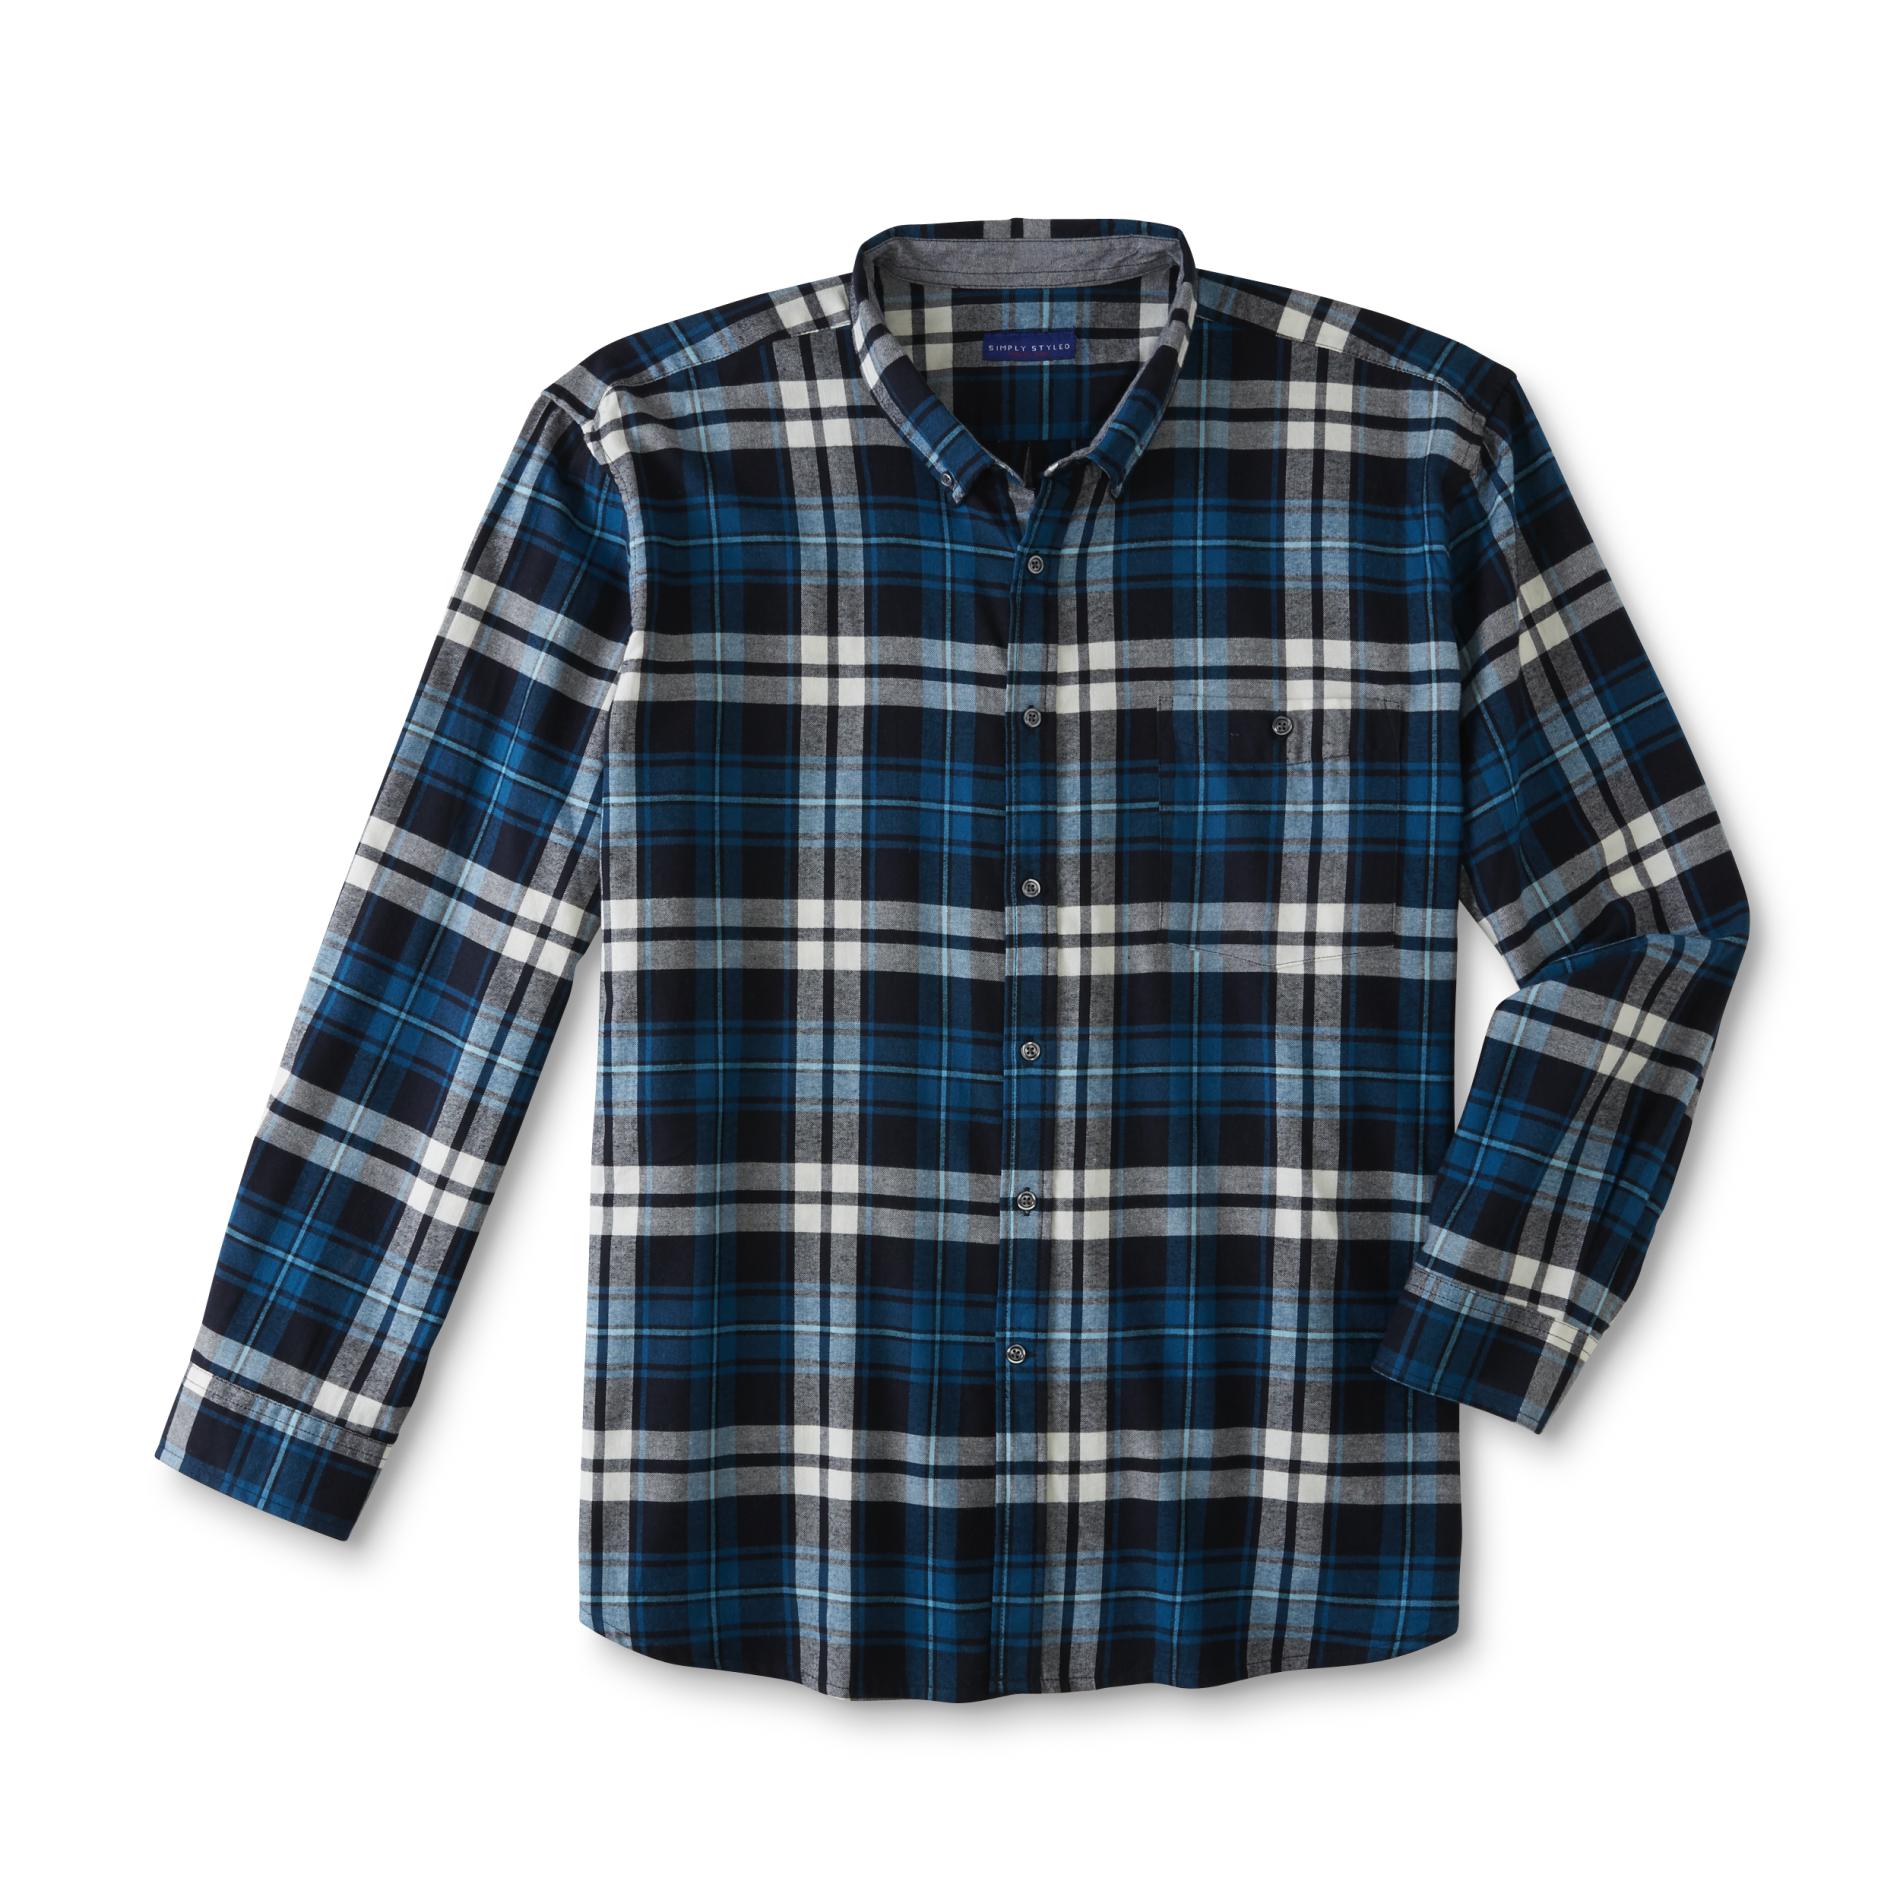 Simply Styled Men's Big & Tall Flannel Shirt - Plaid